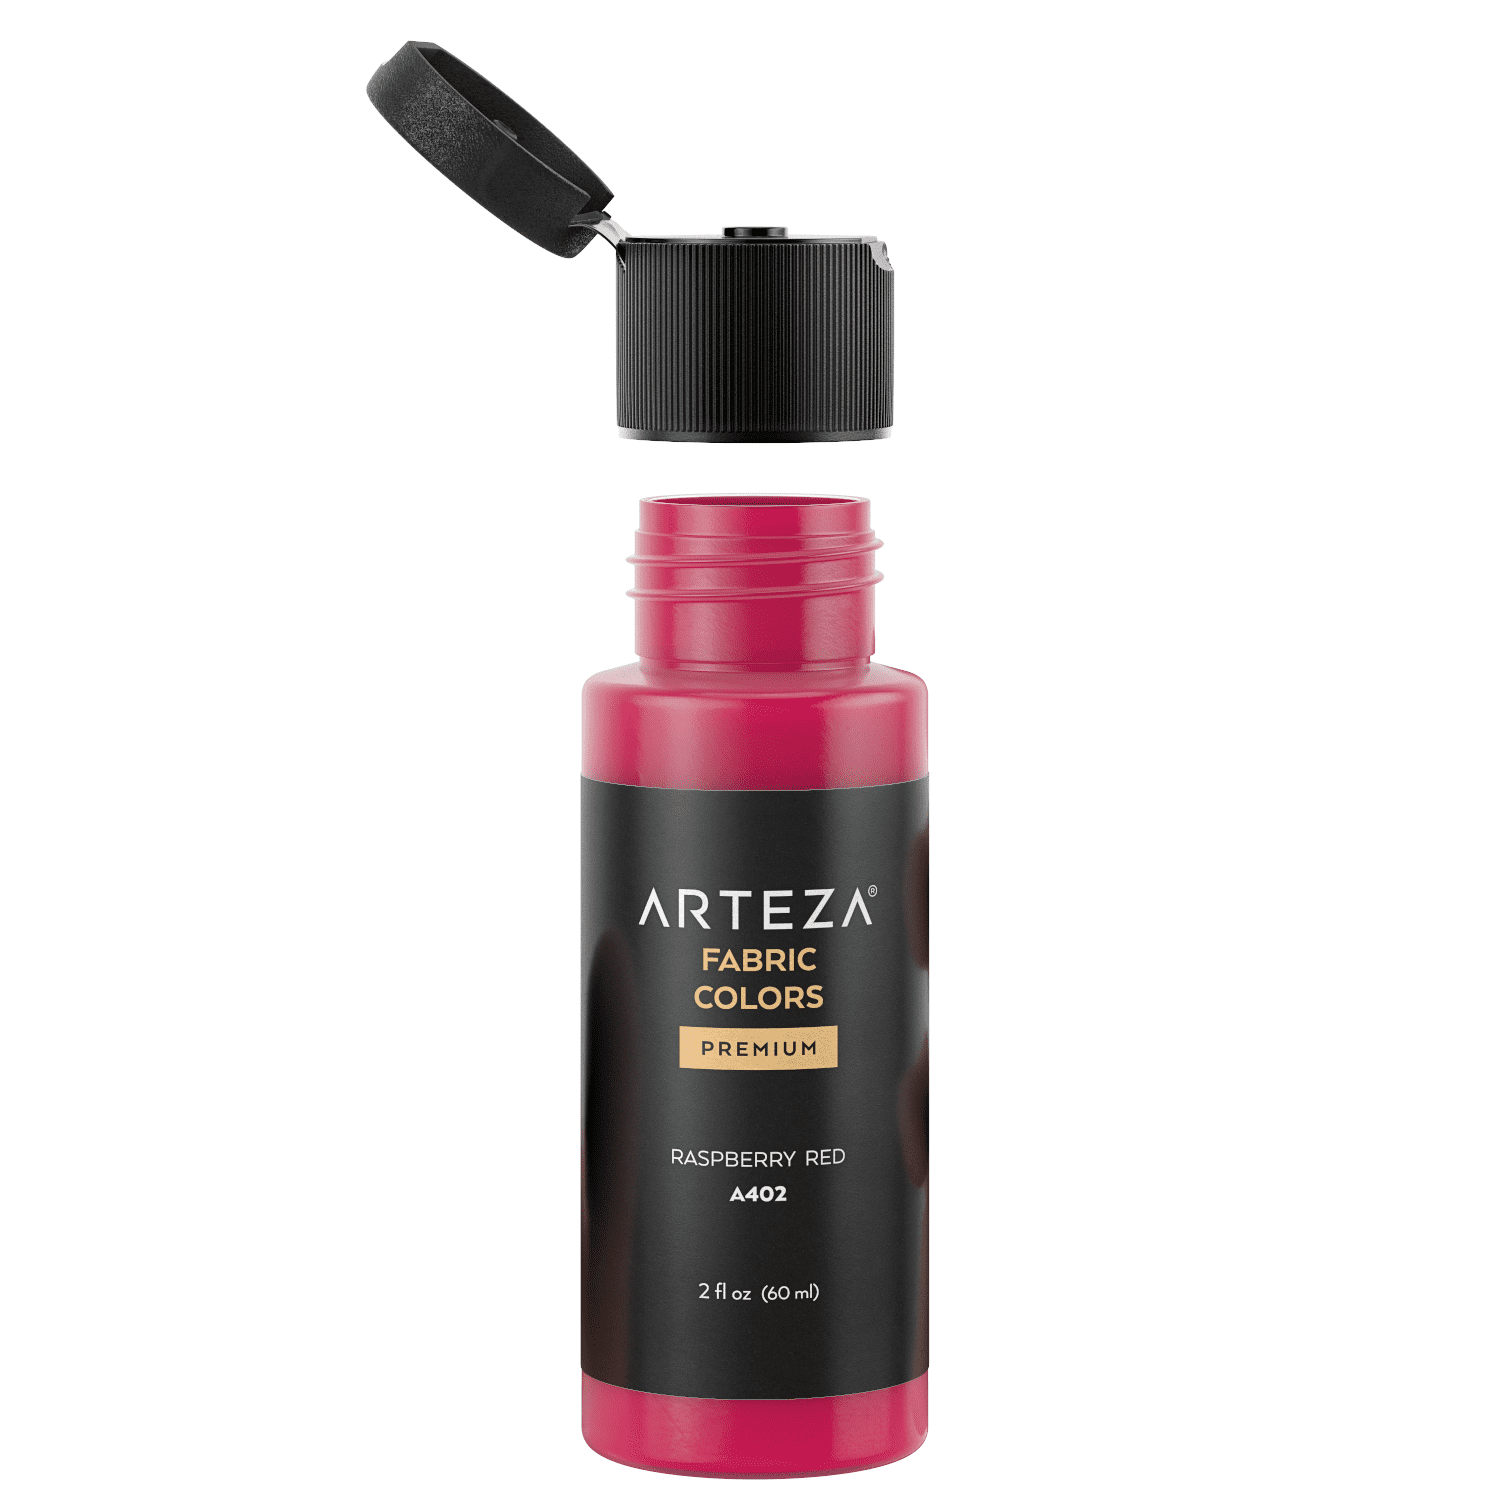 Arteza 3D Fabric Paint, Rose Pink A110, 1oz Tube, Washer & Dryer Safe Textile Paint for Clothing, Accessories, Ceramic, Glass & DIY Projects